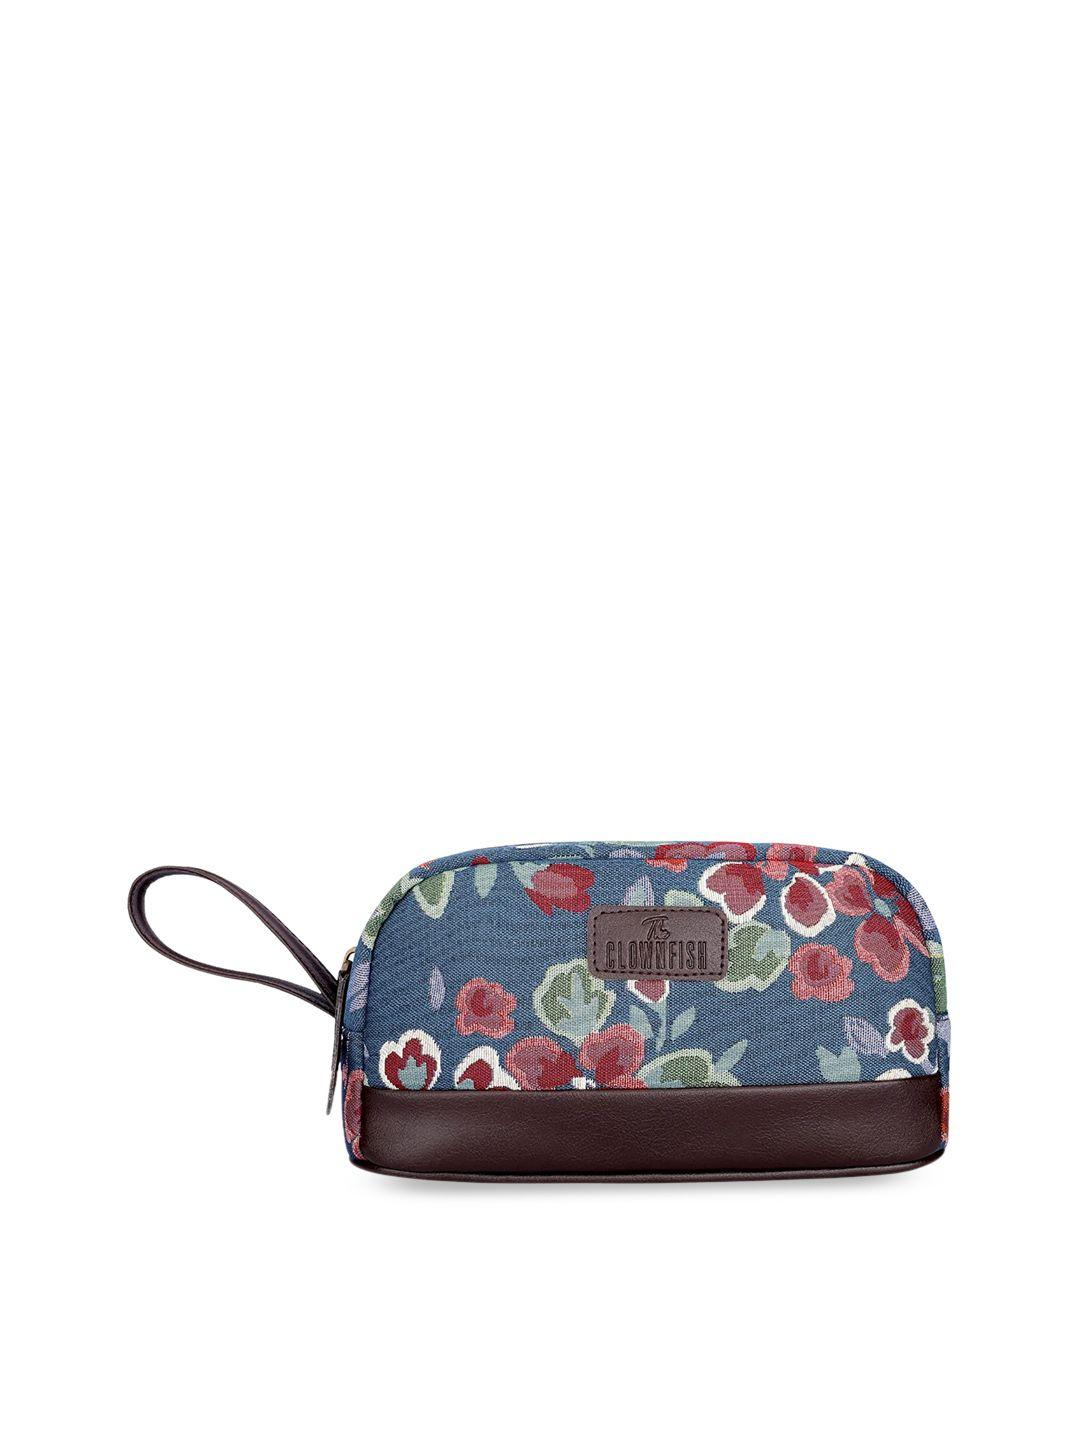 the clownfish floral print textured toiletry kit